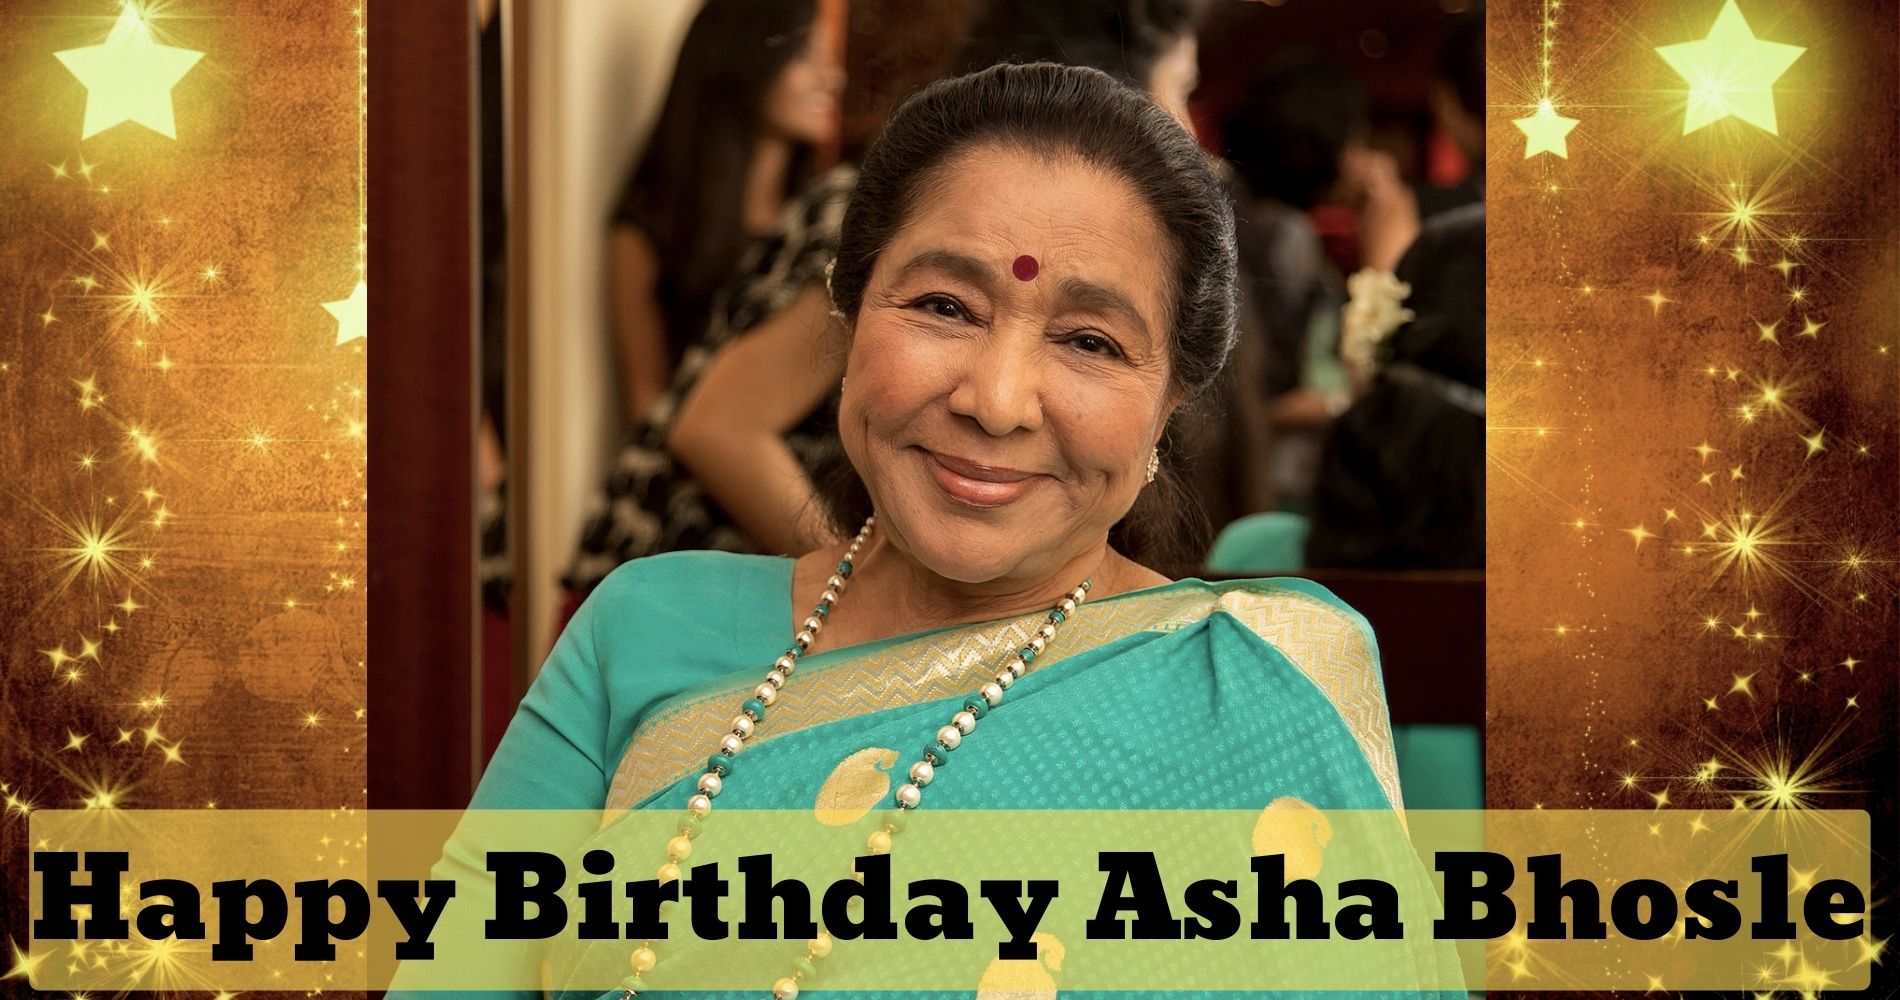 The Queen Of Melody Asha Bhosle Marks Her 90th Birthday